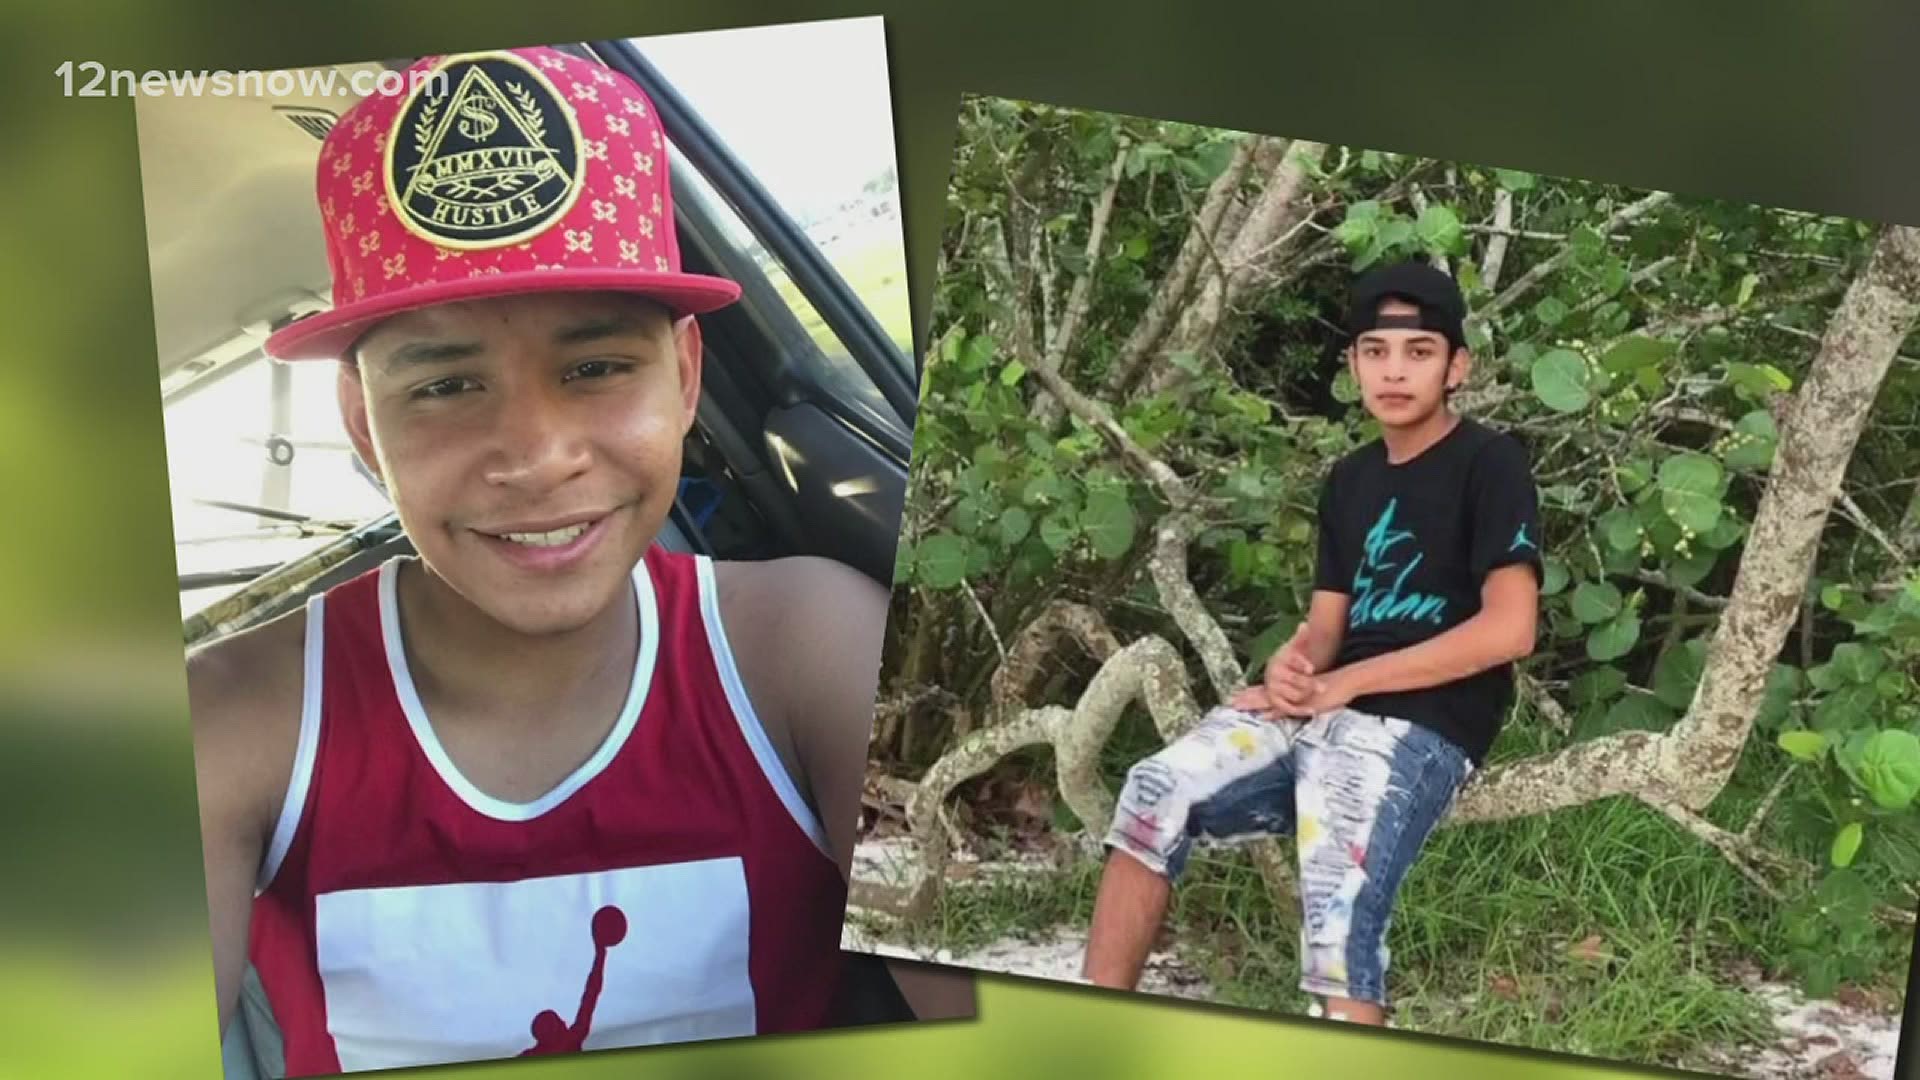 The two young men jumped into the Trinity River on Sunday to try to help save the life of a little girl. Neither resurfaced.